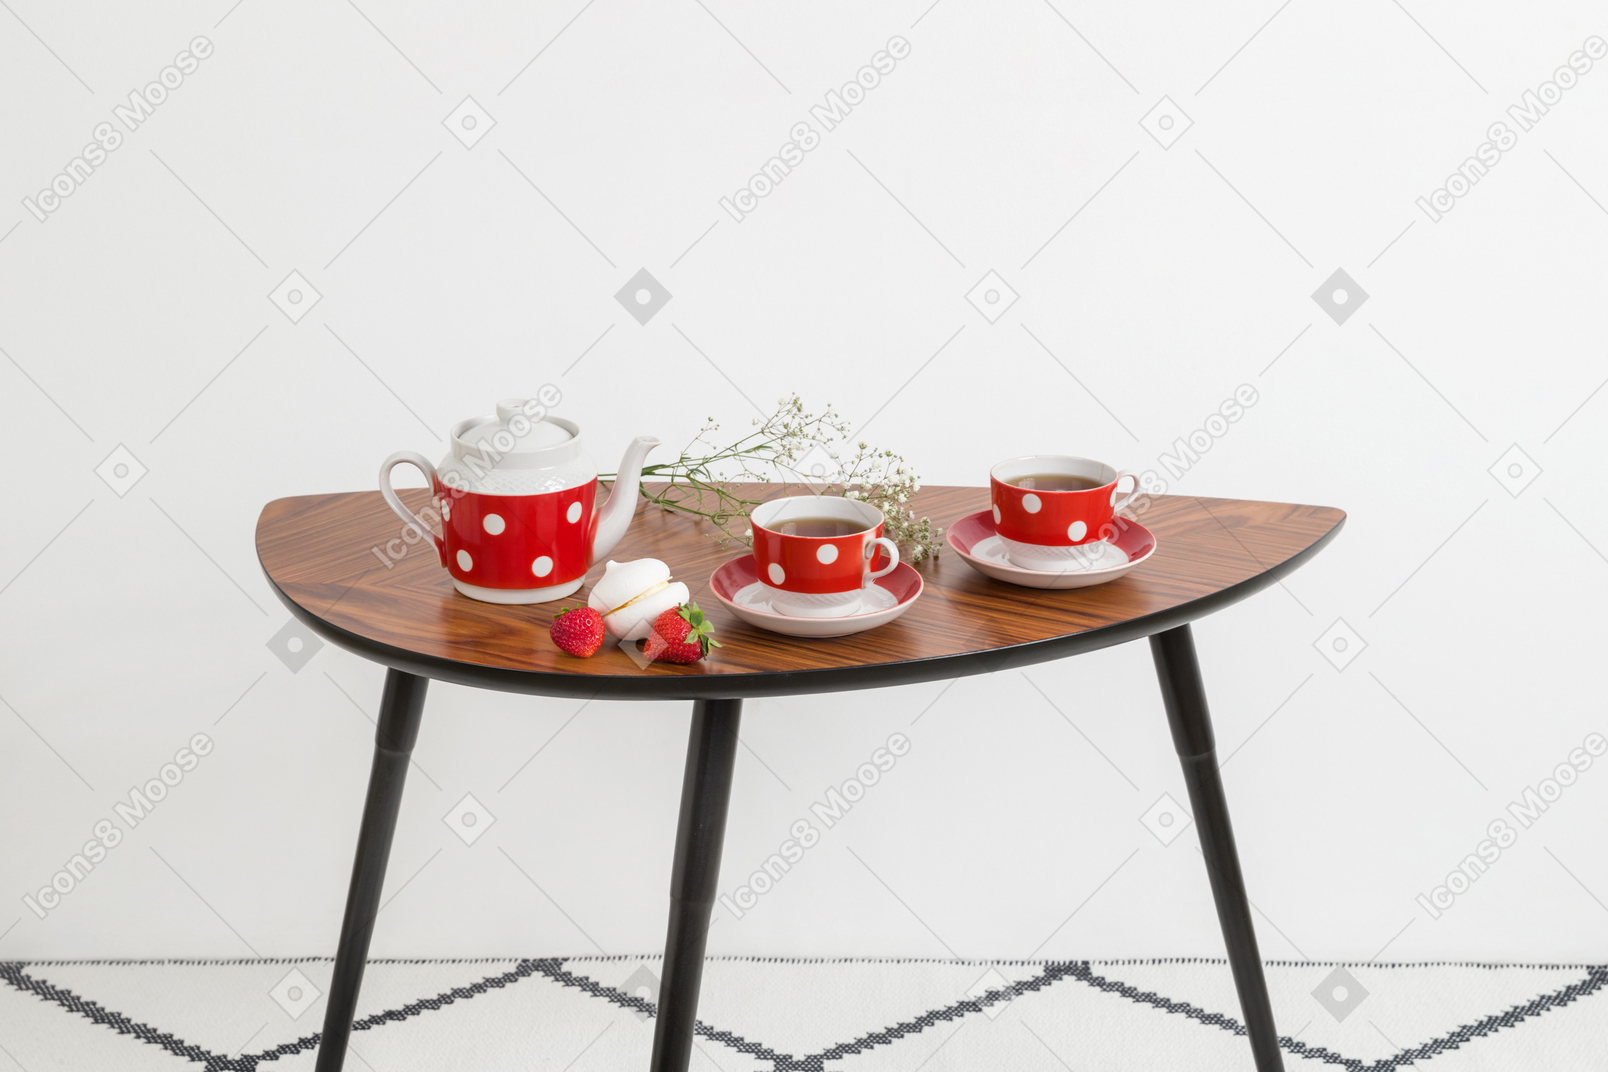 Tea party table setting